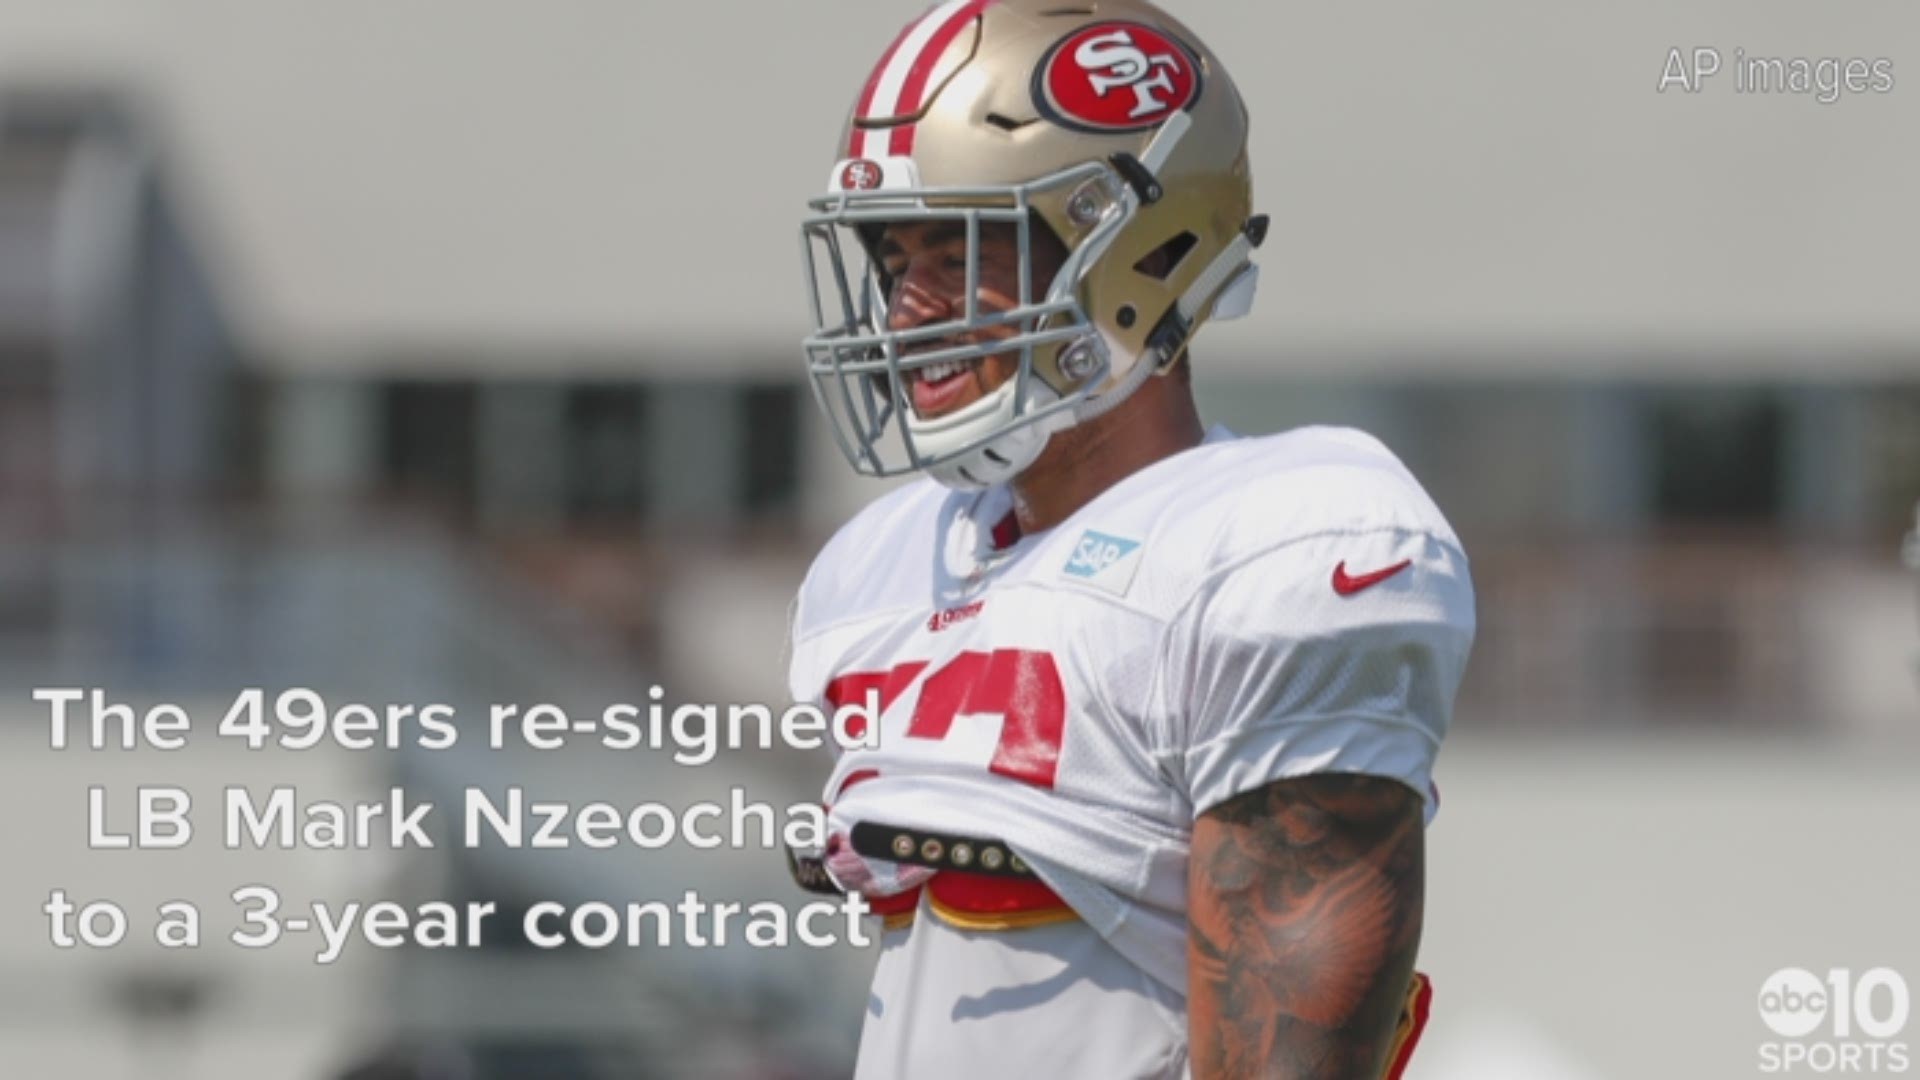 The San Francisco 49ers have re-signed linebacker Mark Nzeocha to a three-year contract and released defensive end Cassius Marsh.